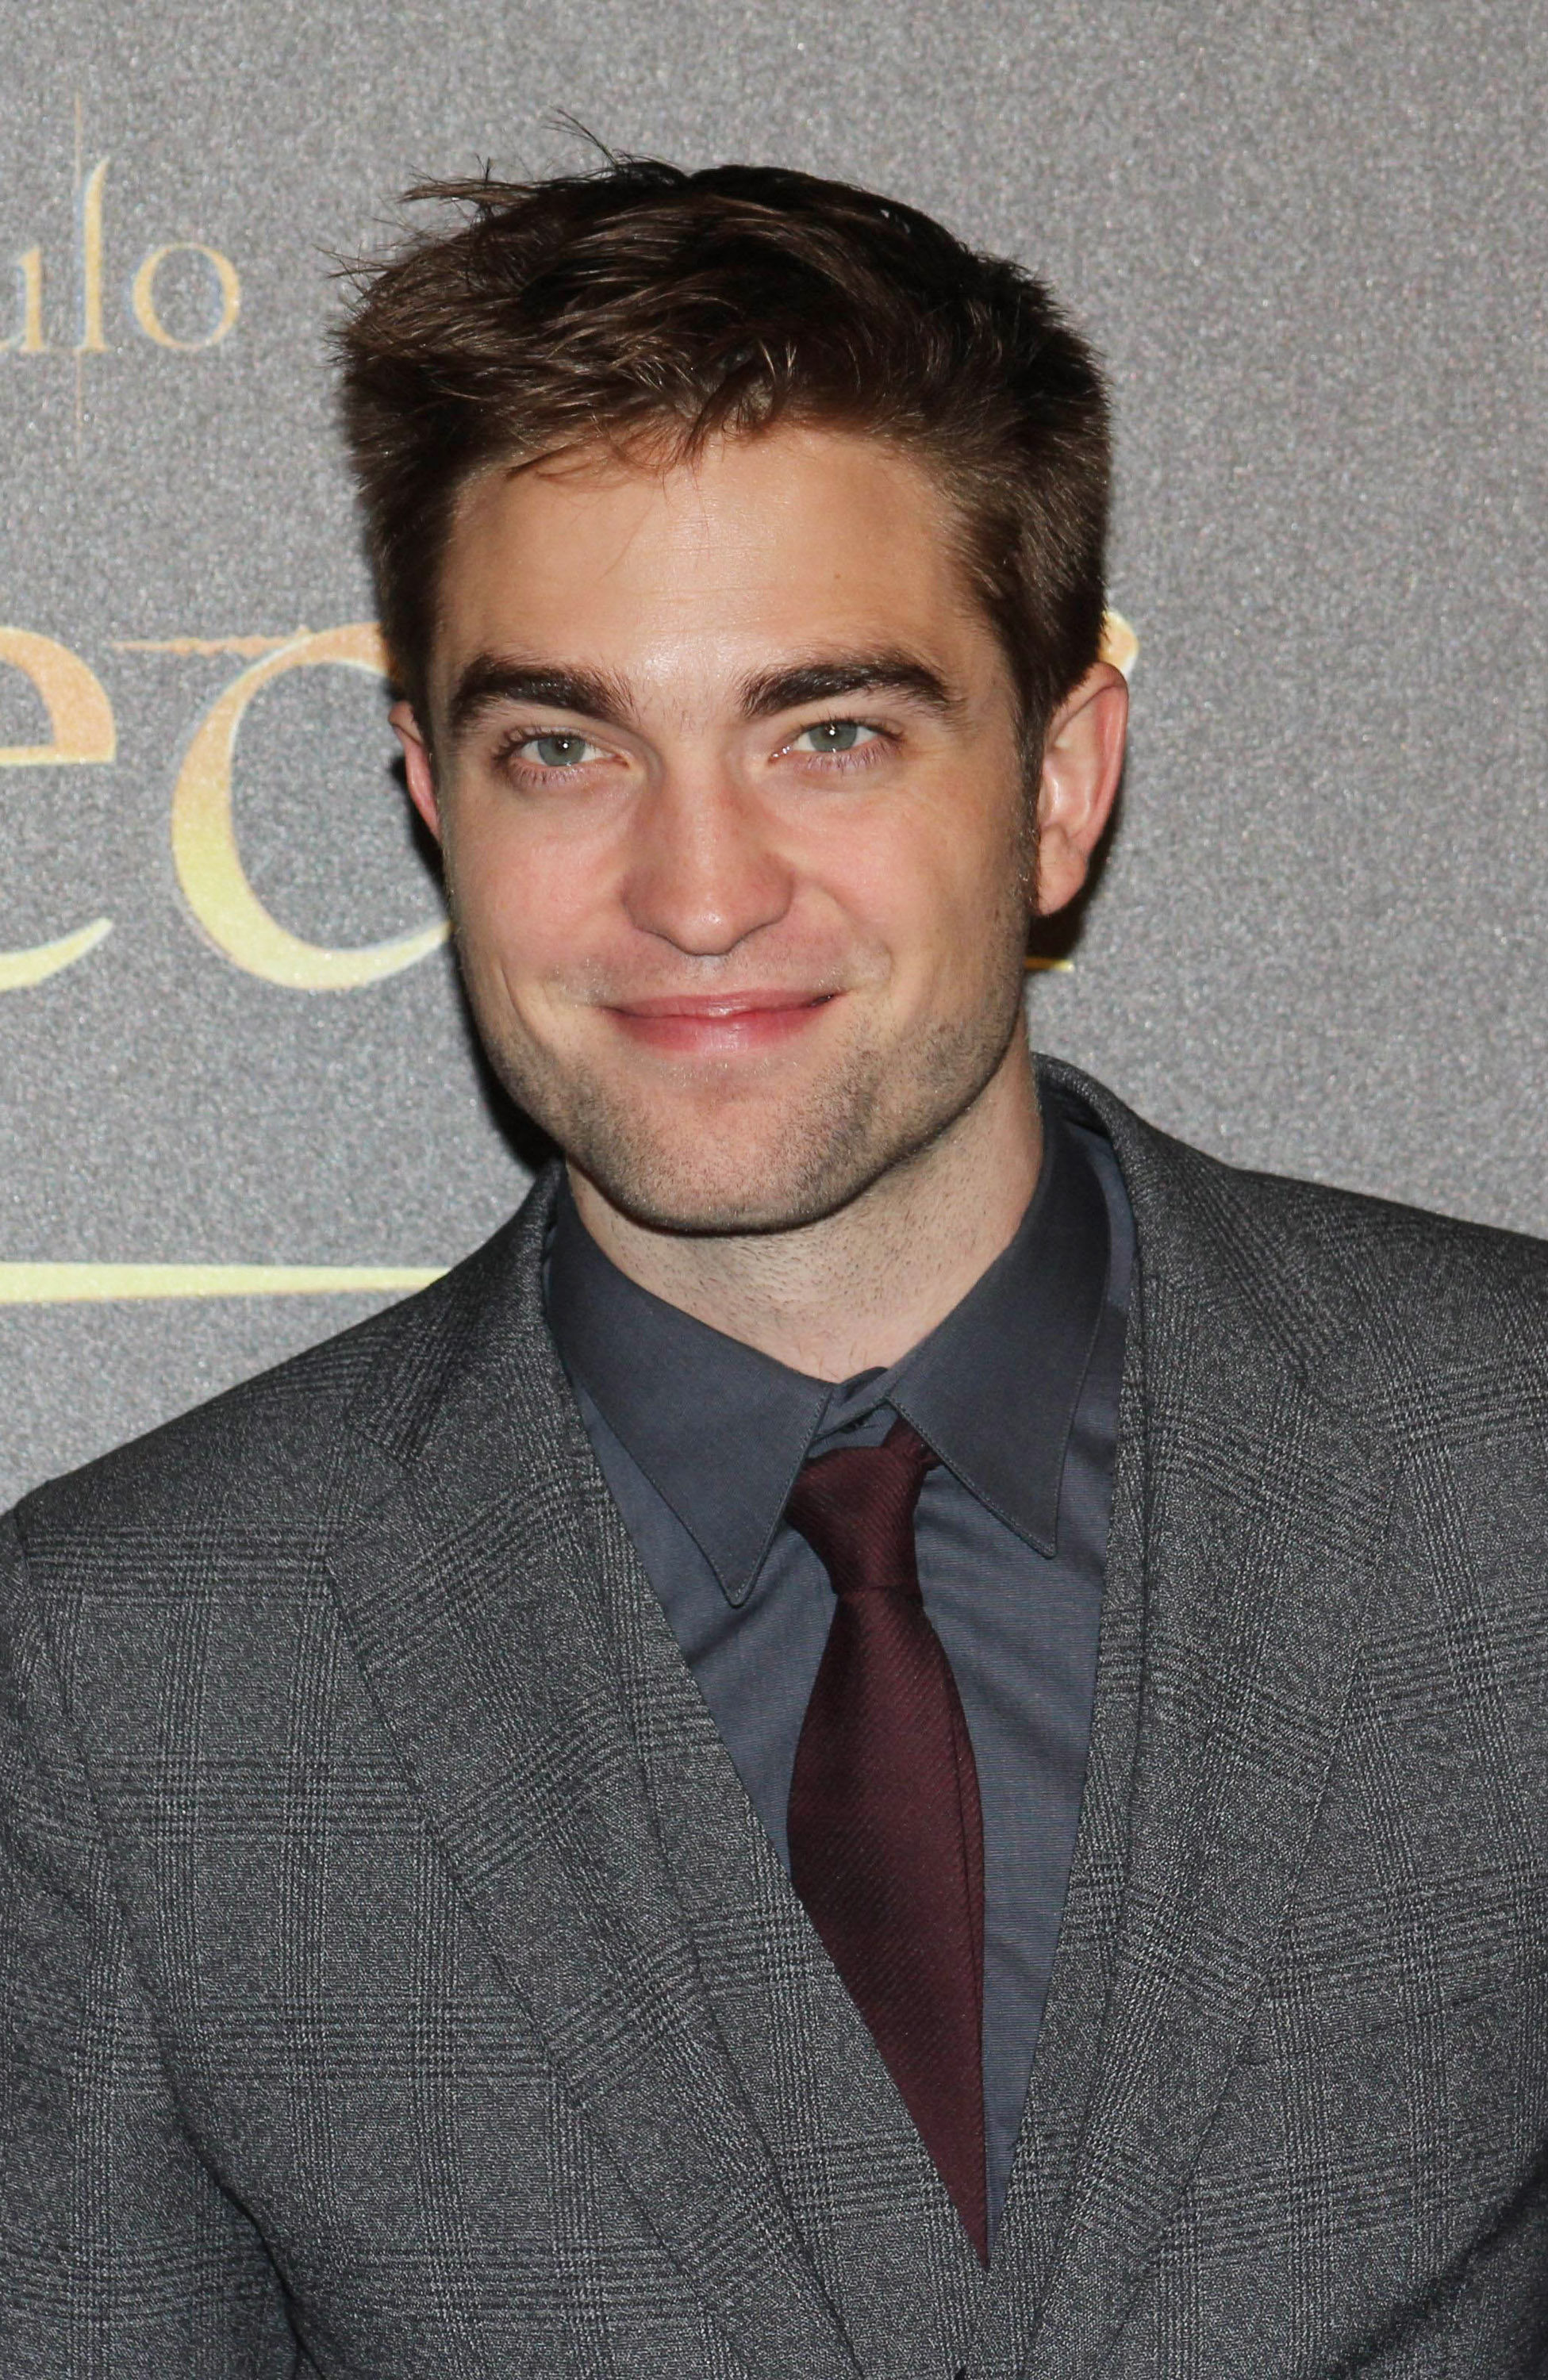 Robert Patinson at the 2012 Madrid premiere of Breaking Dawn: Part 2